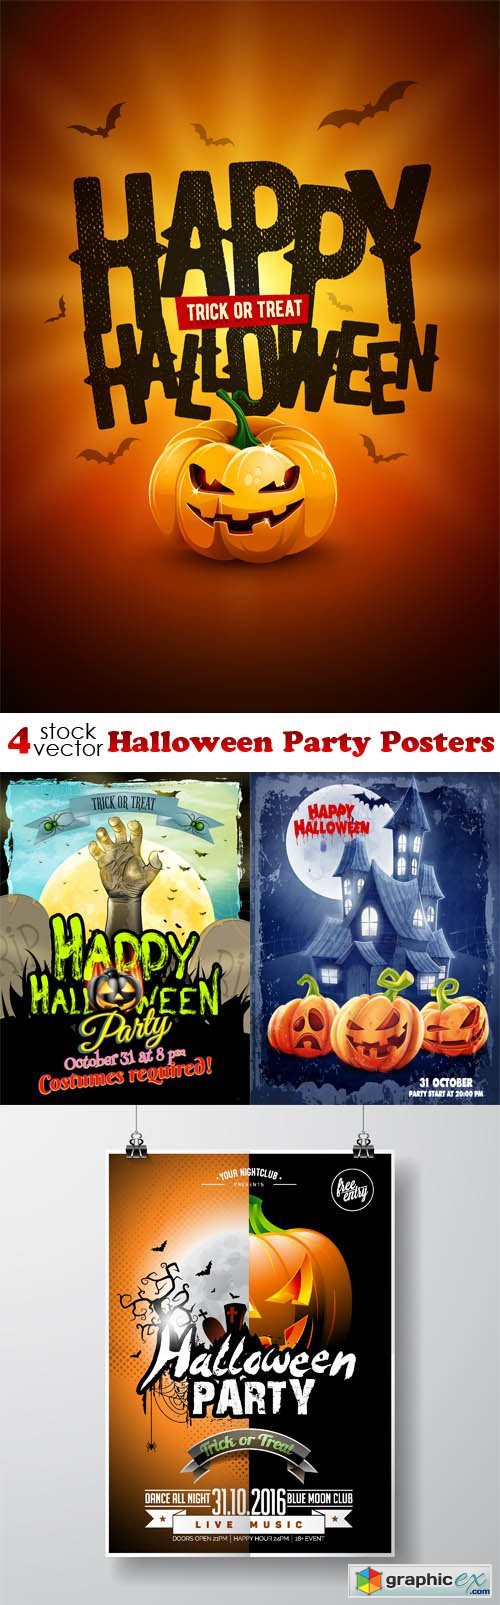 Halloween Party Posters